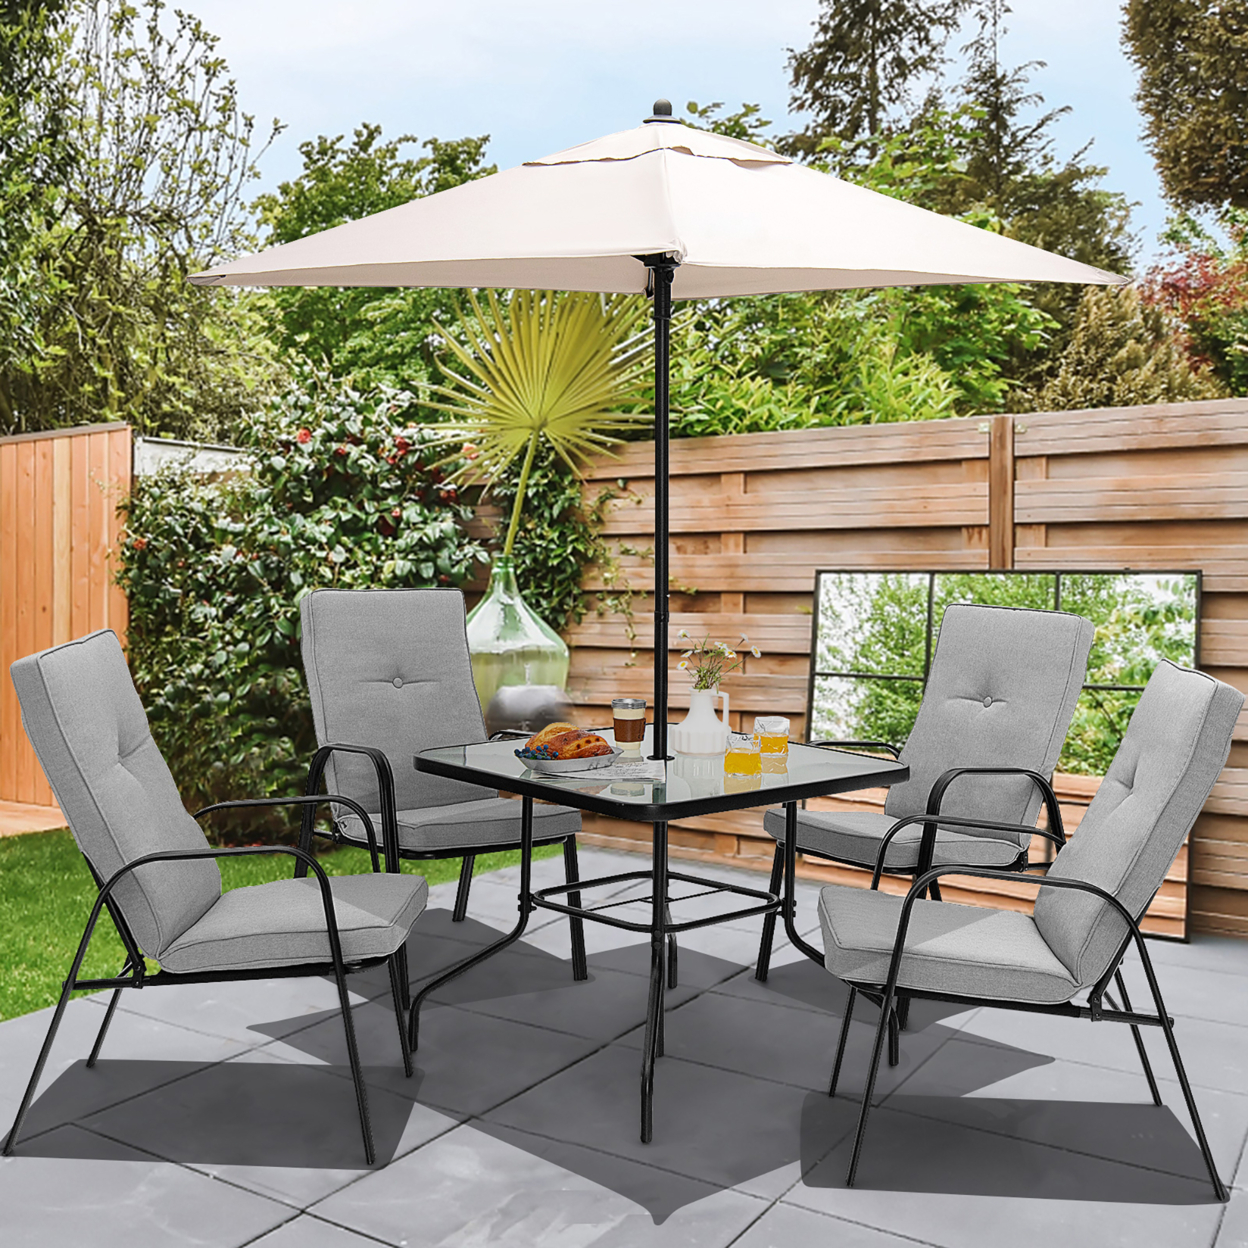 6PCS Outdoor Dining Set Patio Table & Chair Furniture Set W/ Cushions & Umbrella